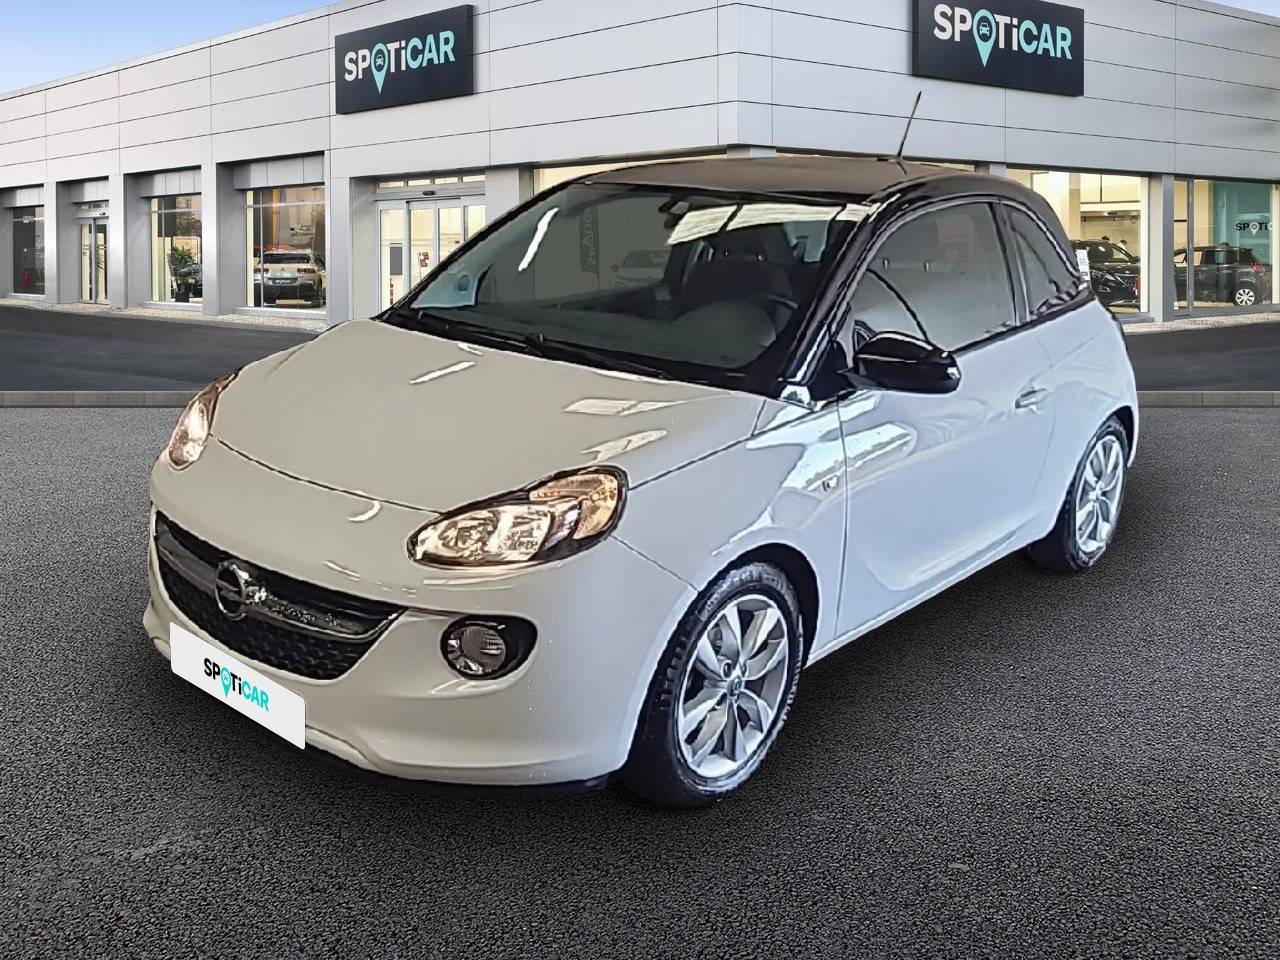 OPEL Adam 1.4 Twinport 87 ch S/S Unlimited - Véhicule d'occasion